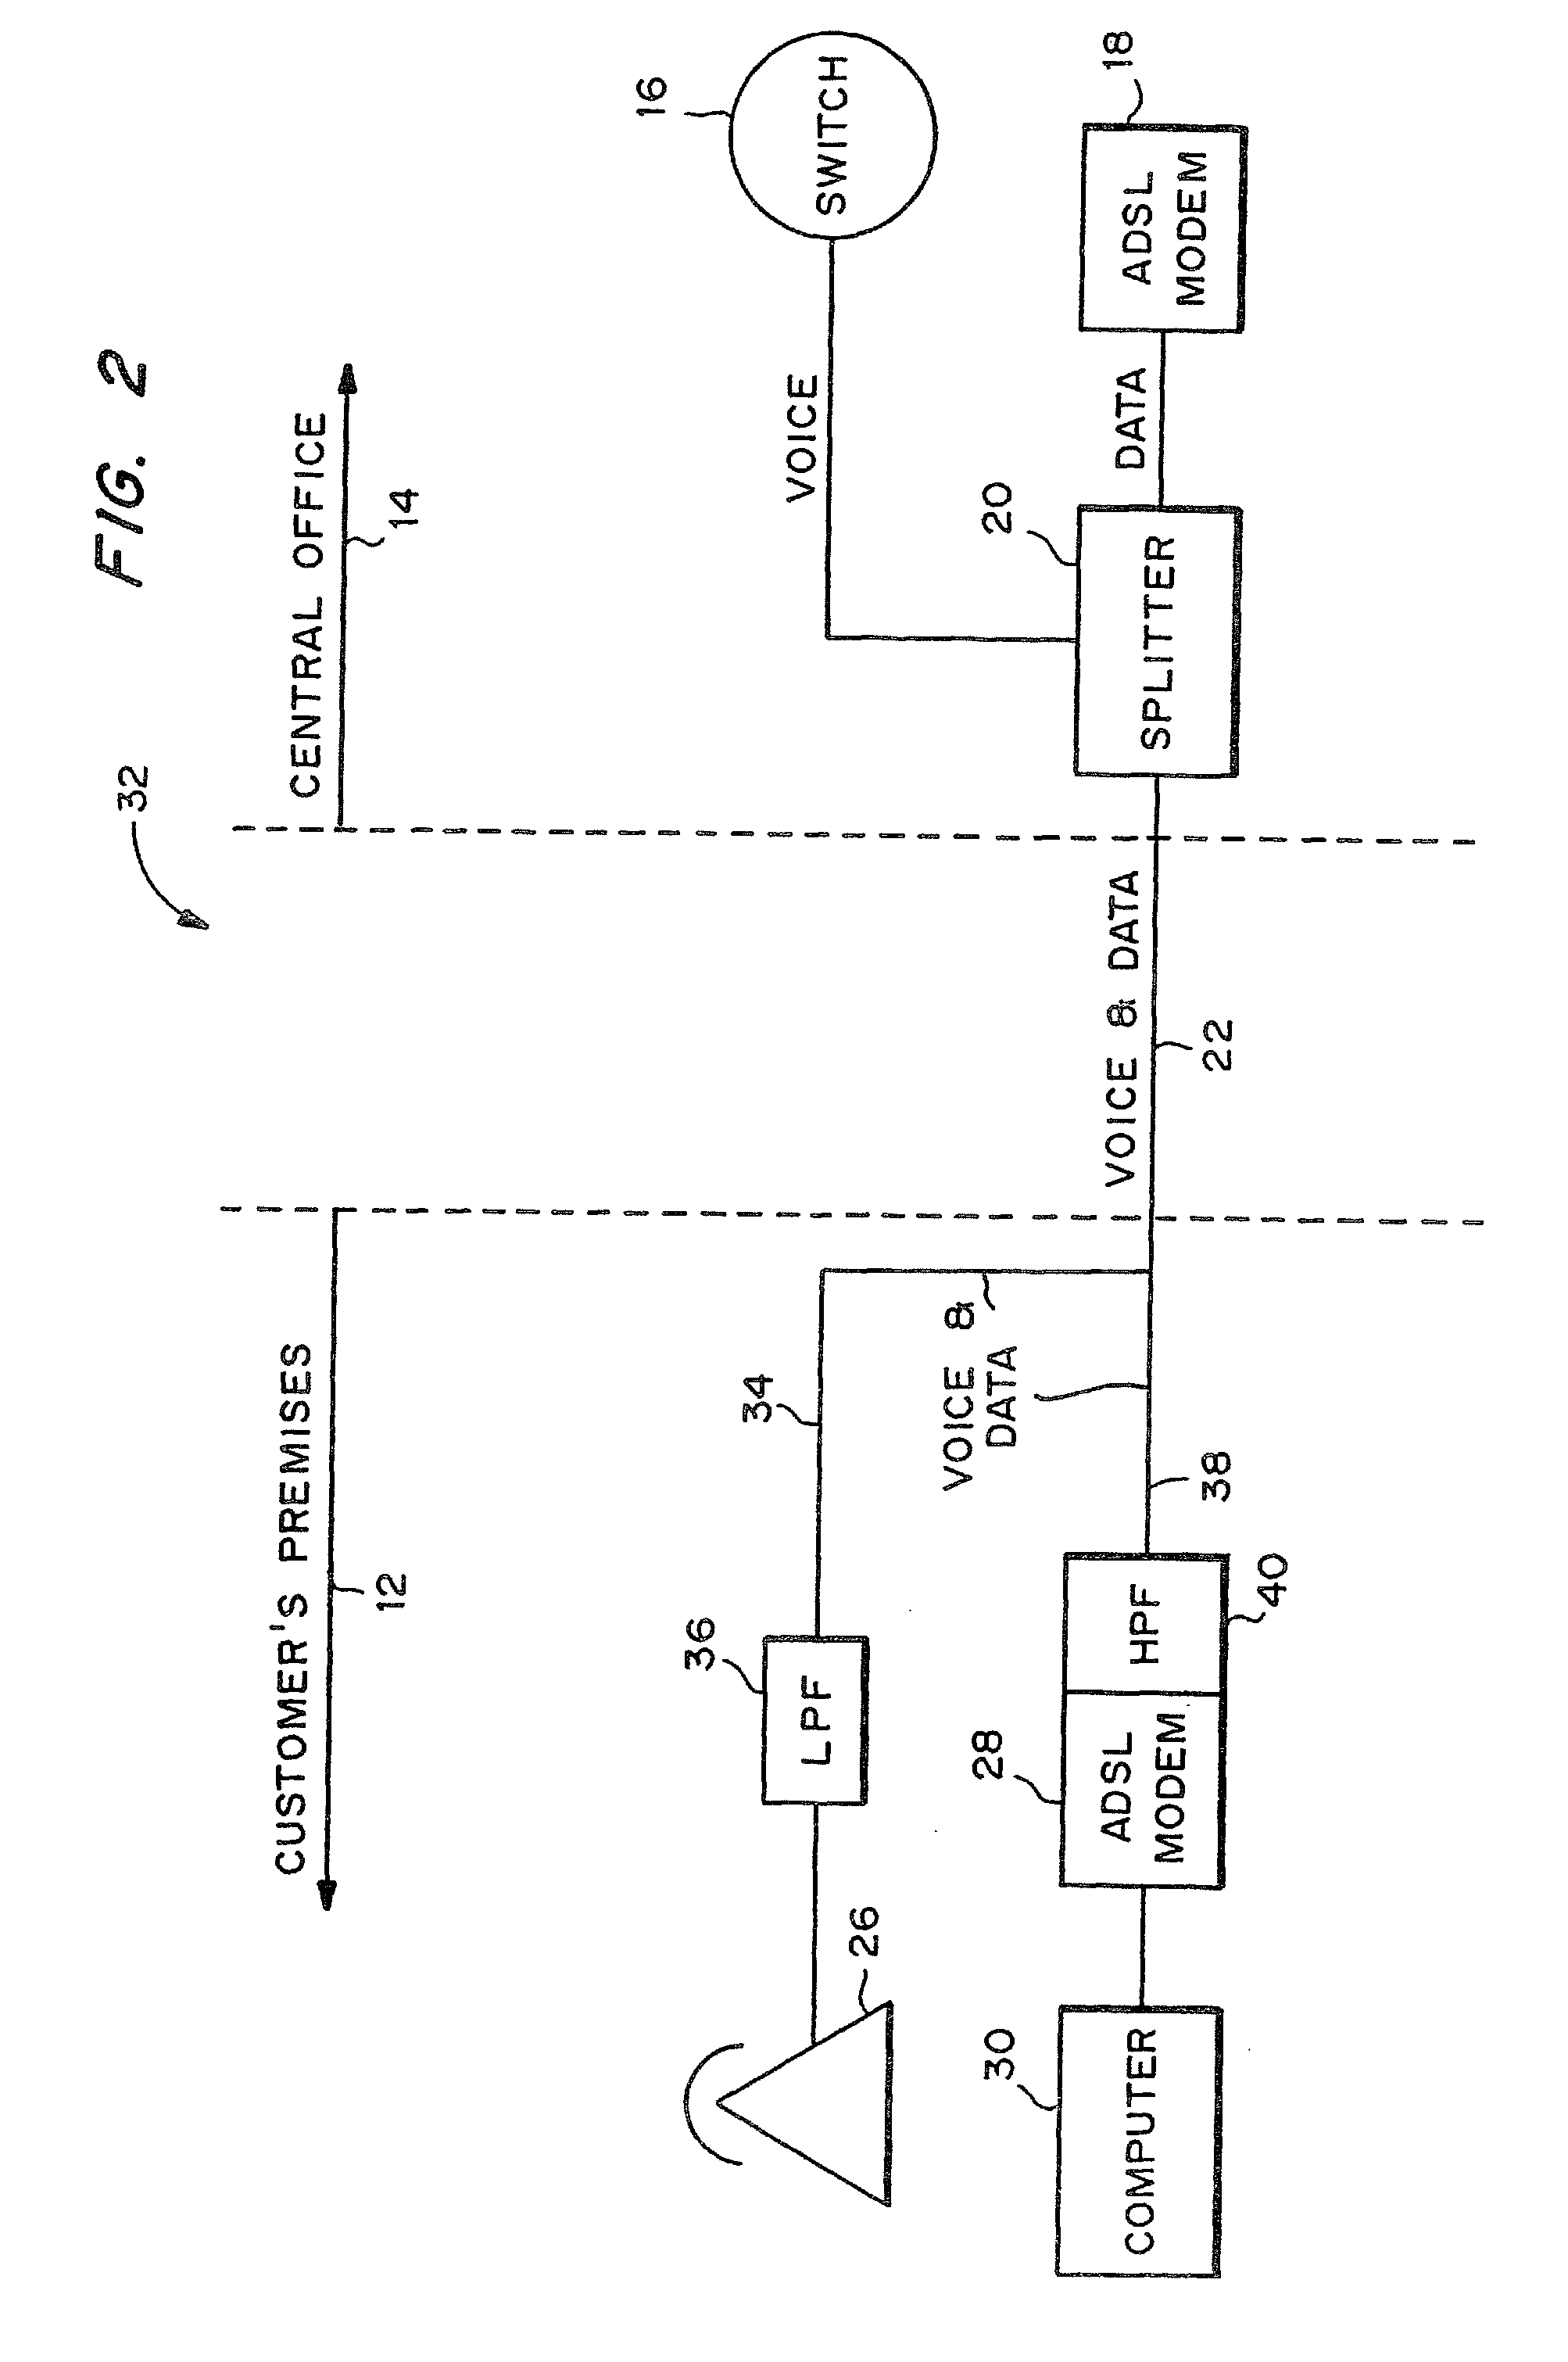 Method and system for selection of mode of operation of a service in light of use of another service in an ADSL system